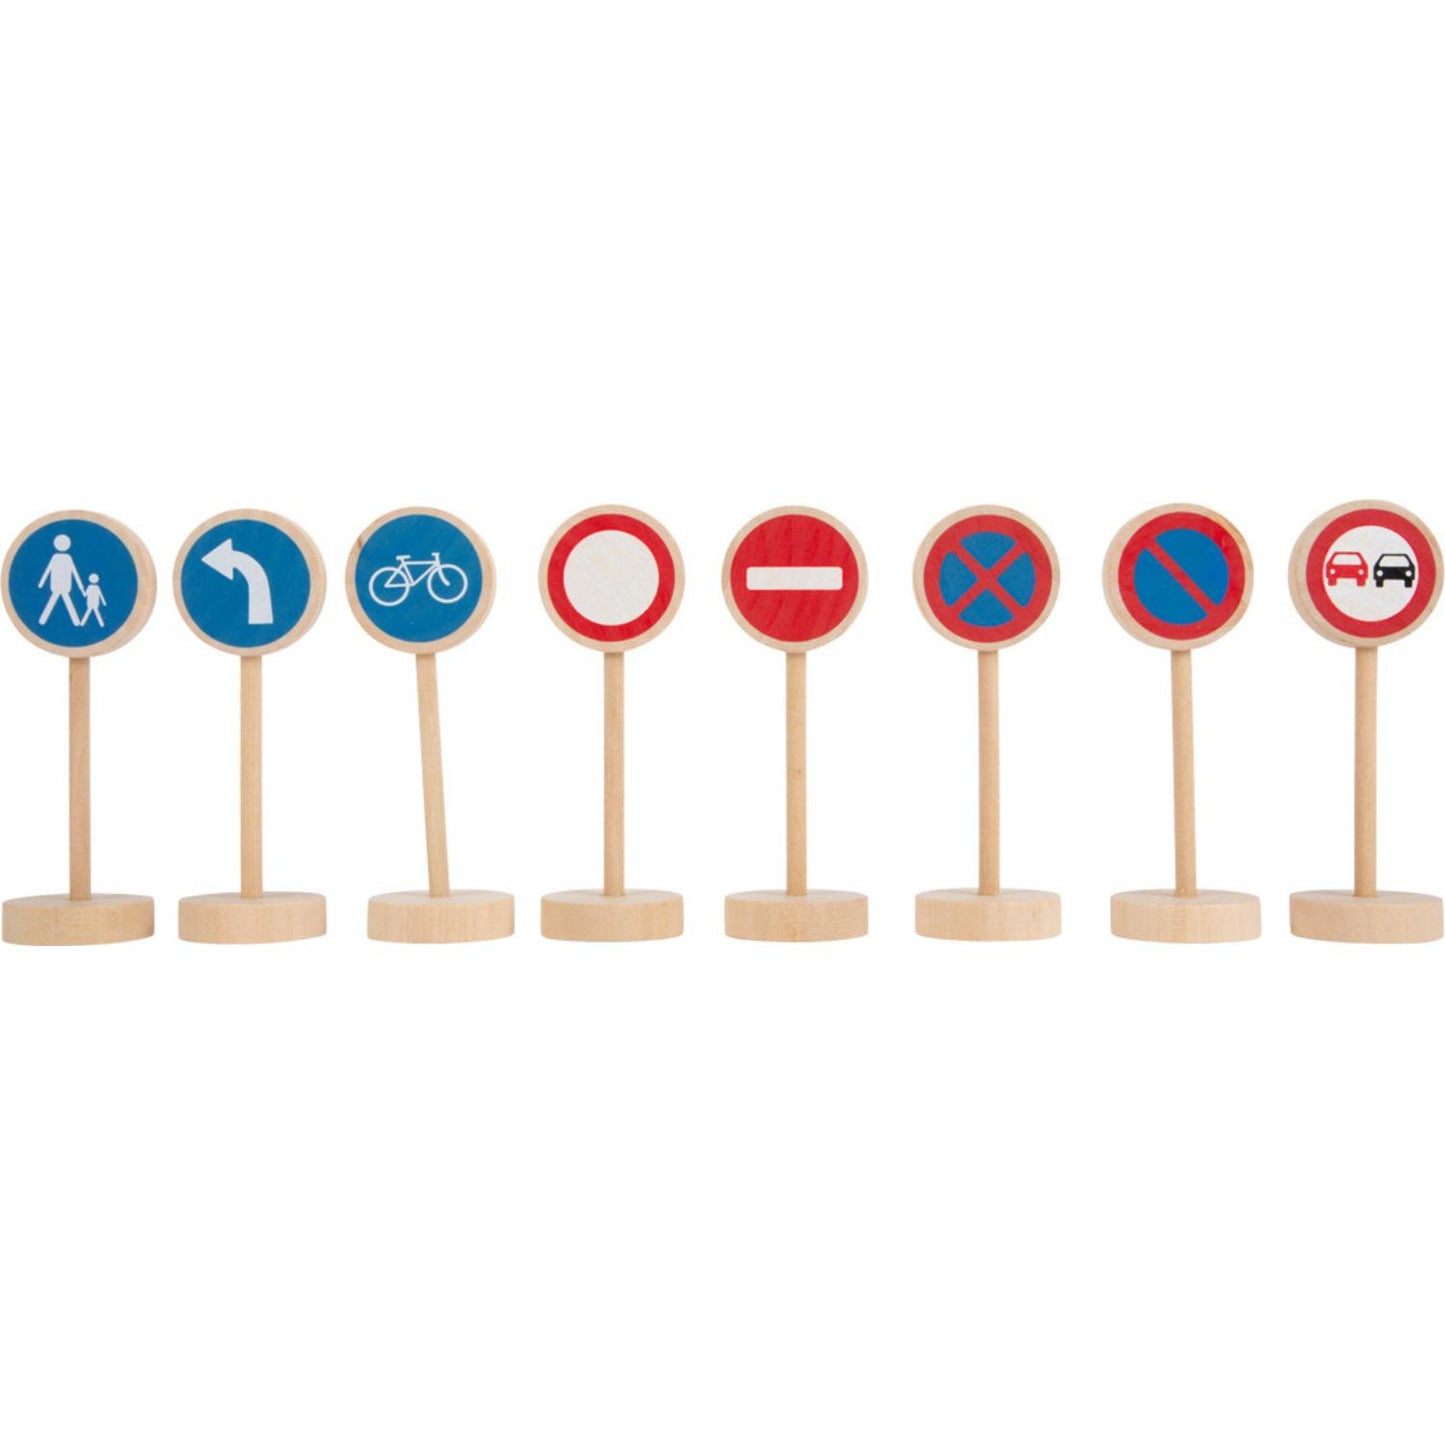 Toy Road Signs | 25 Pieces | Wooden Toys for Kids